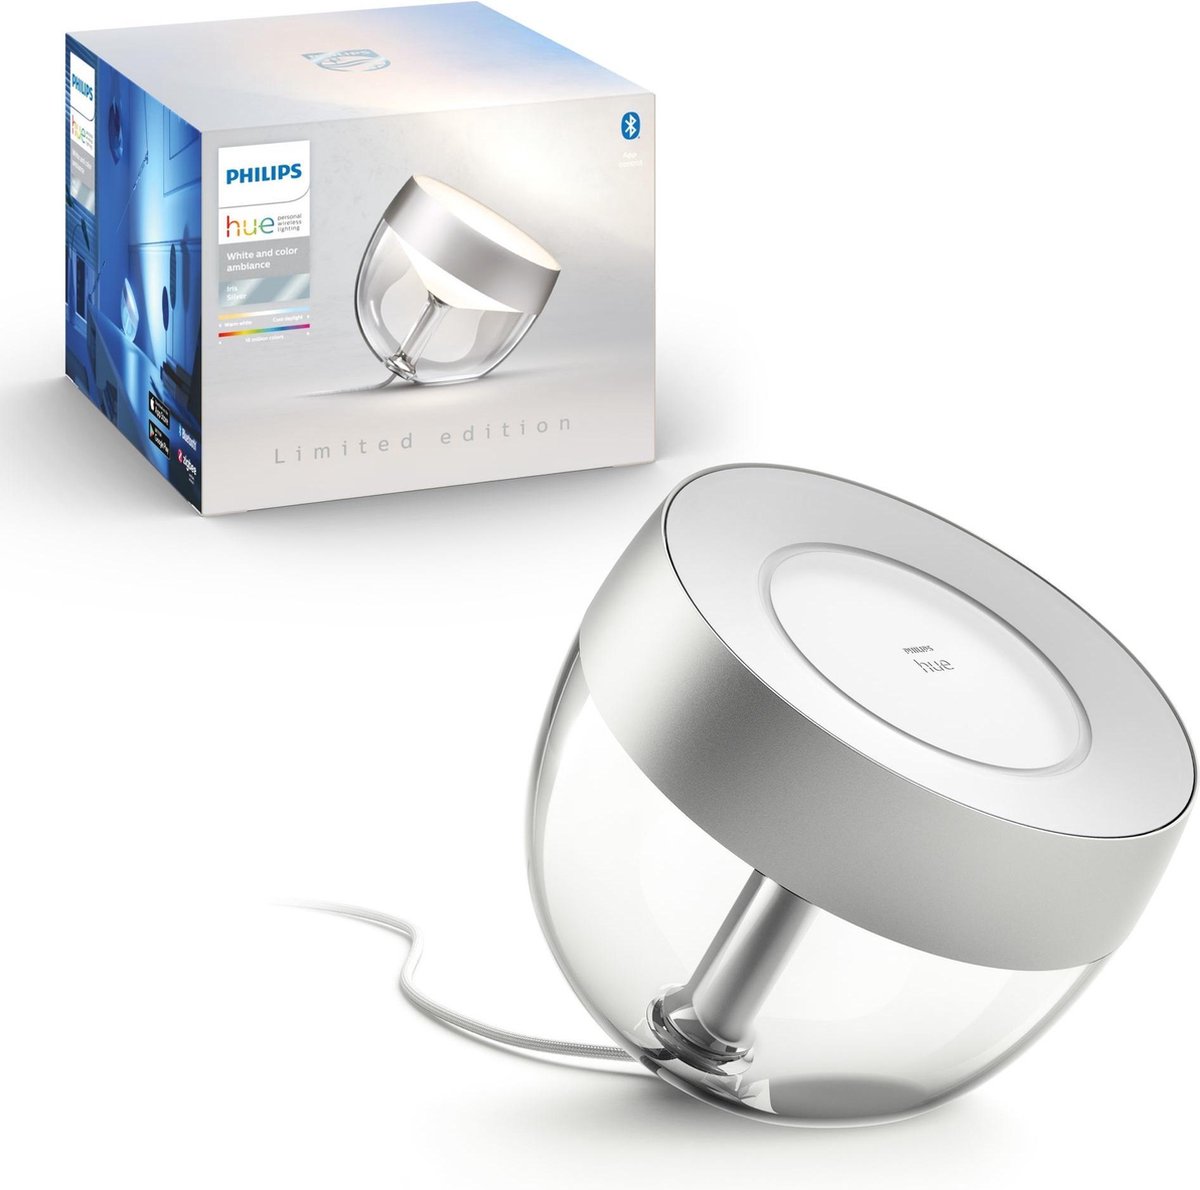 Philips Hue Iris Tafellamp - White and Color Ambiance - Gëintegreerd LED - Zilver - 8,1W - Bluetooth - Limited Edition